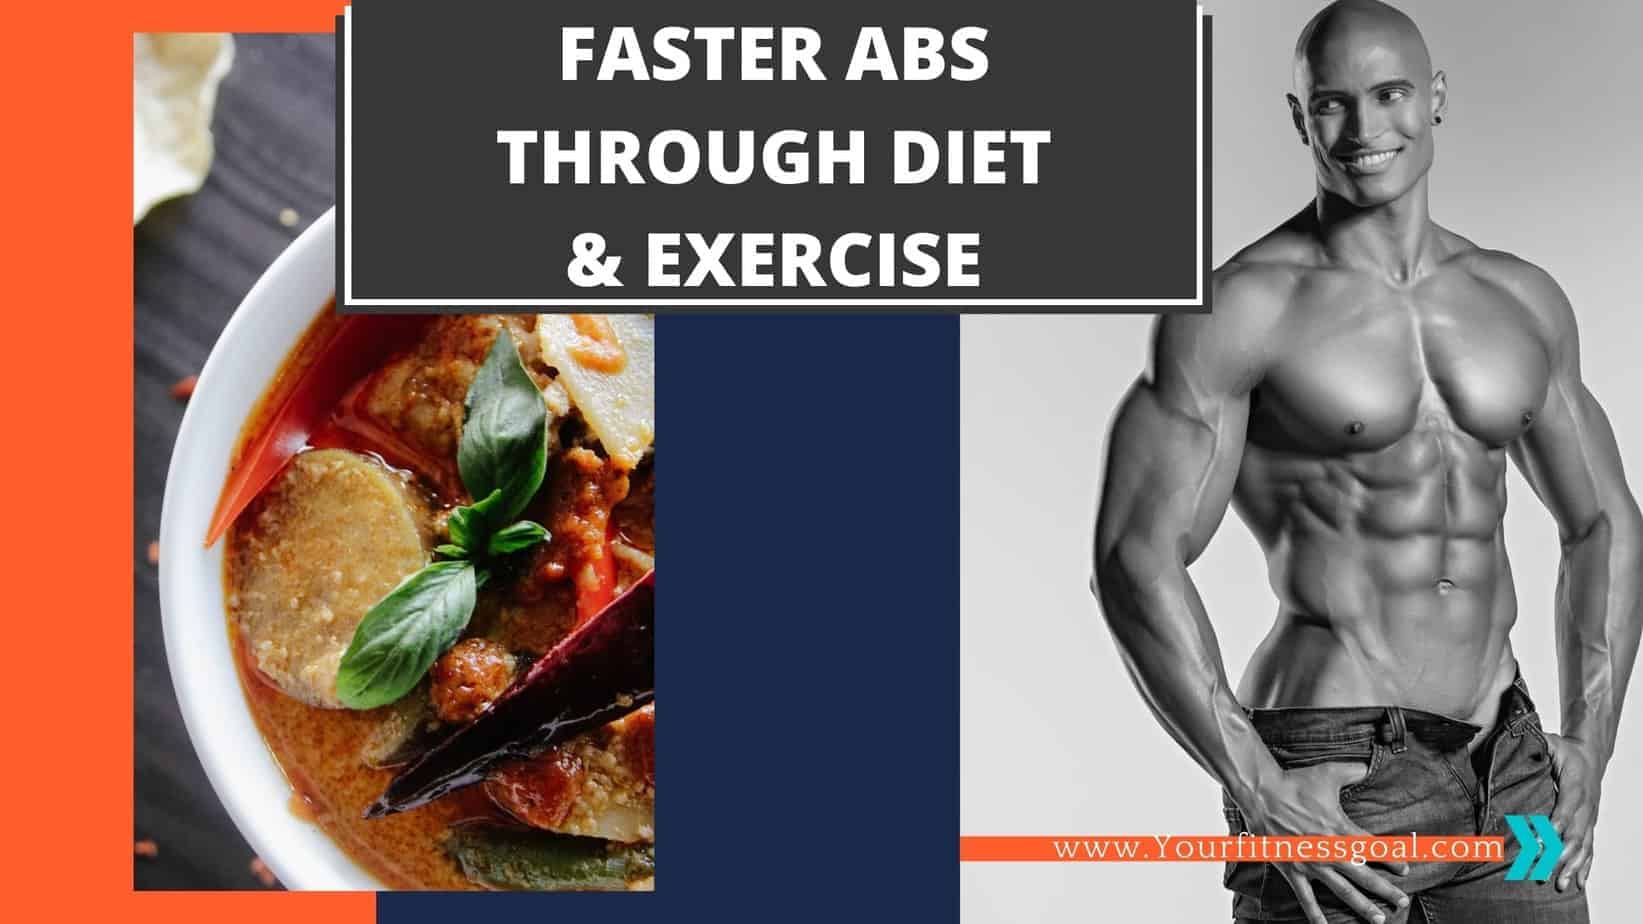 How to get faster abs through diet & exercise?